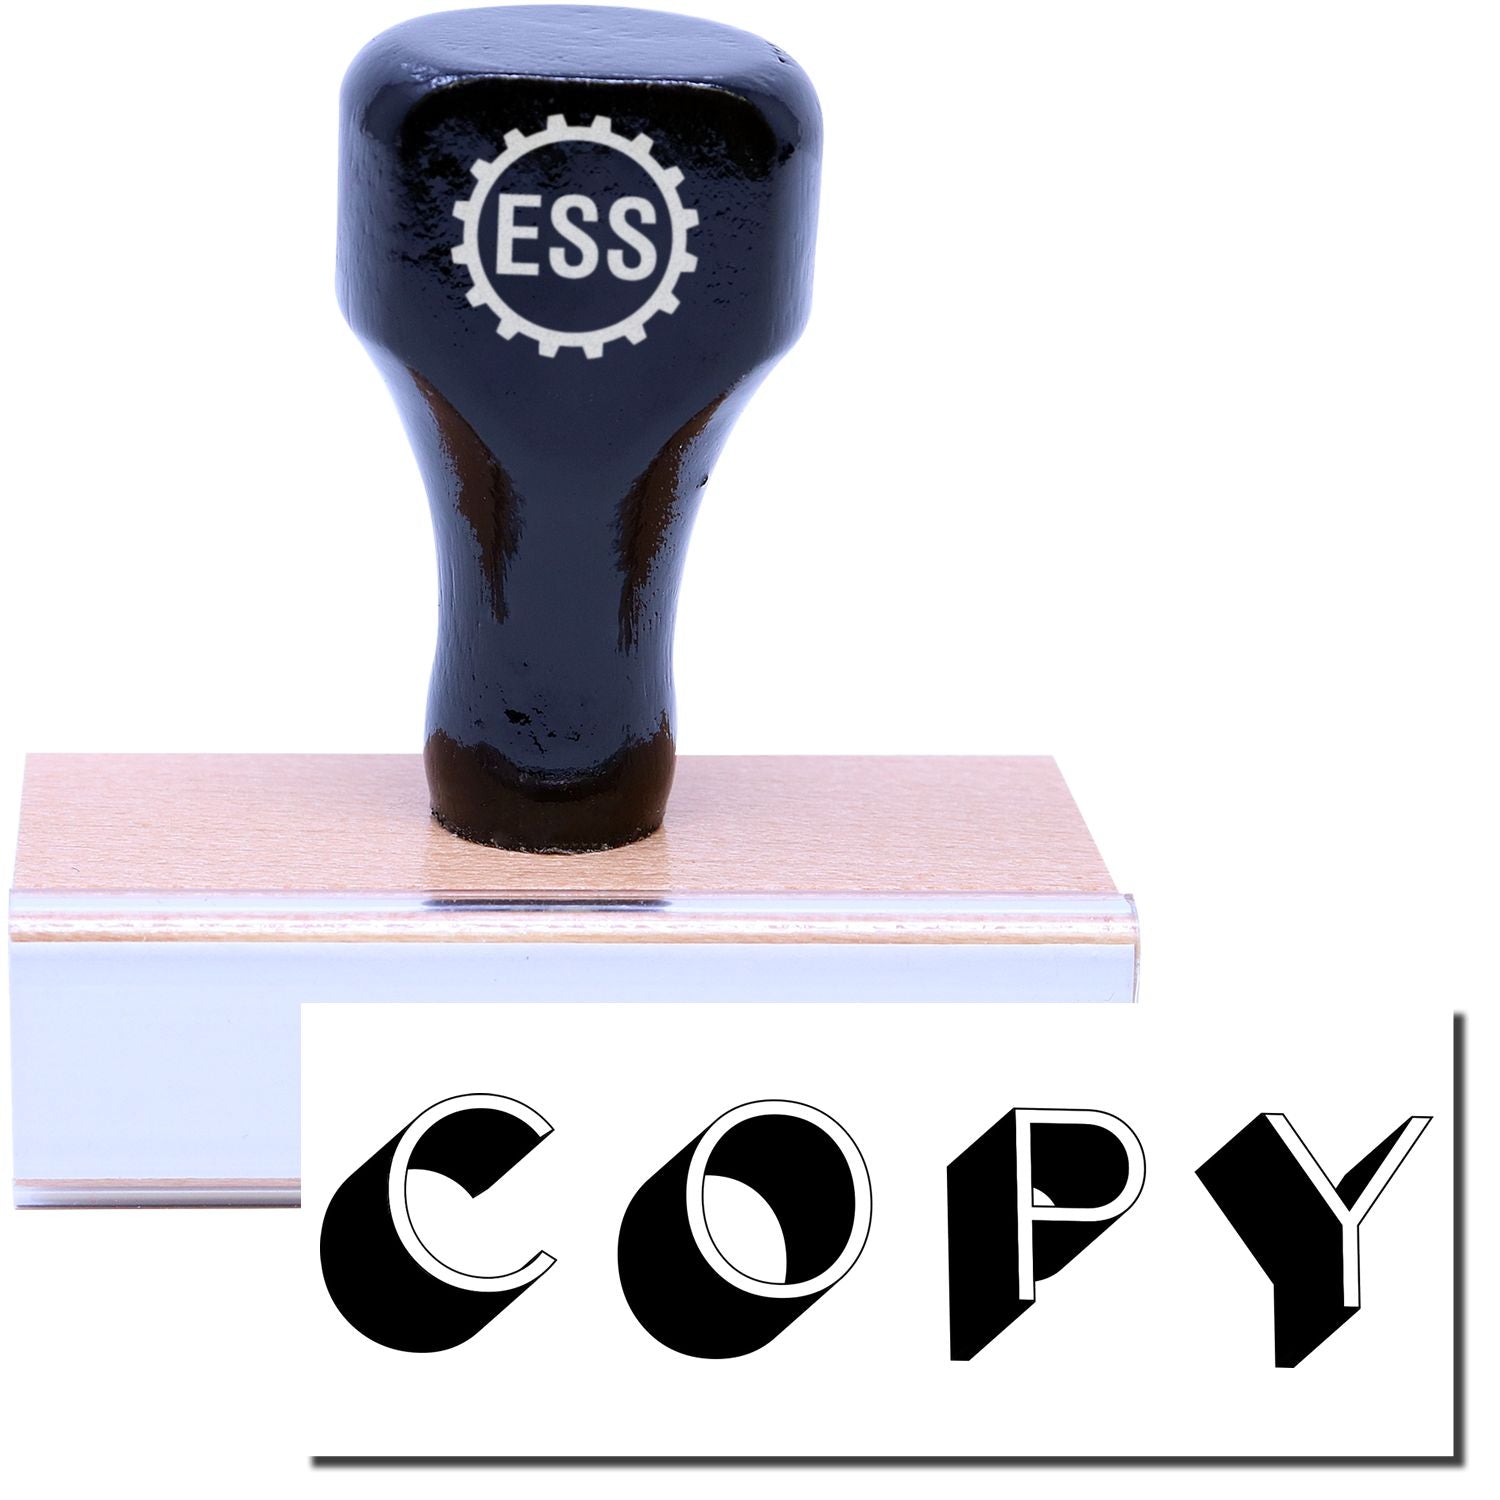 A stock office rubber stamp with a stamped image showing how the text "COPY" in a large font with a shadow behind the word is displayed after stamping.